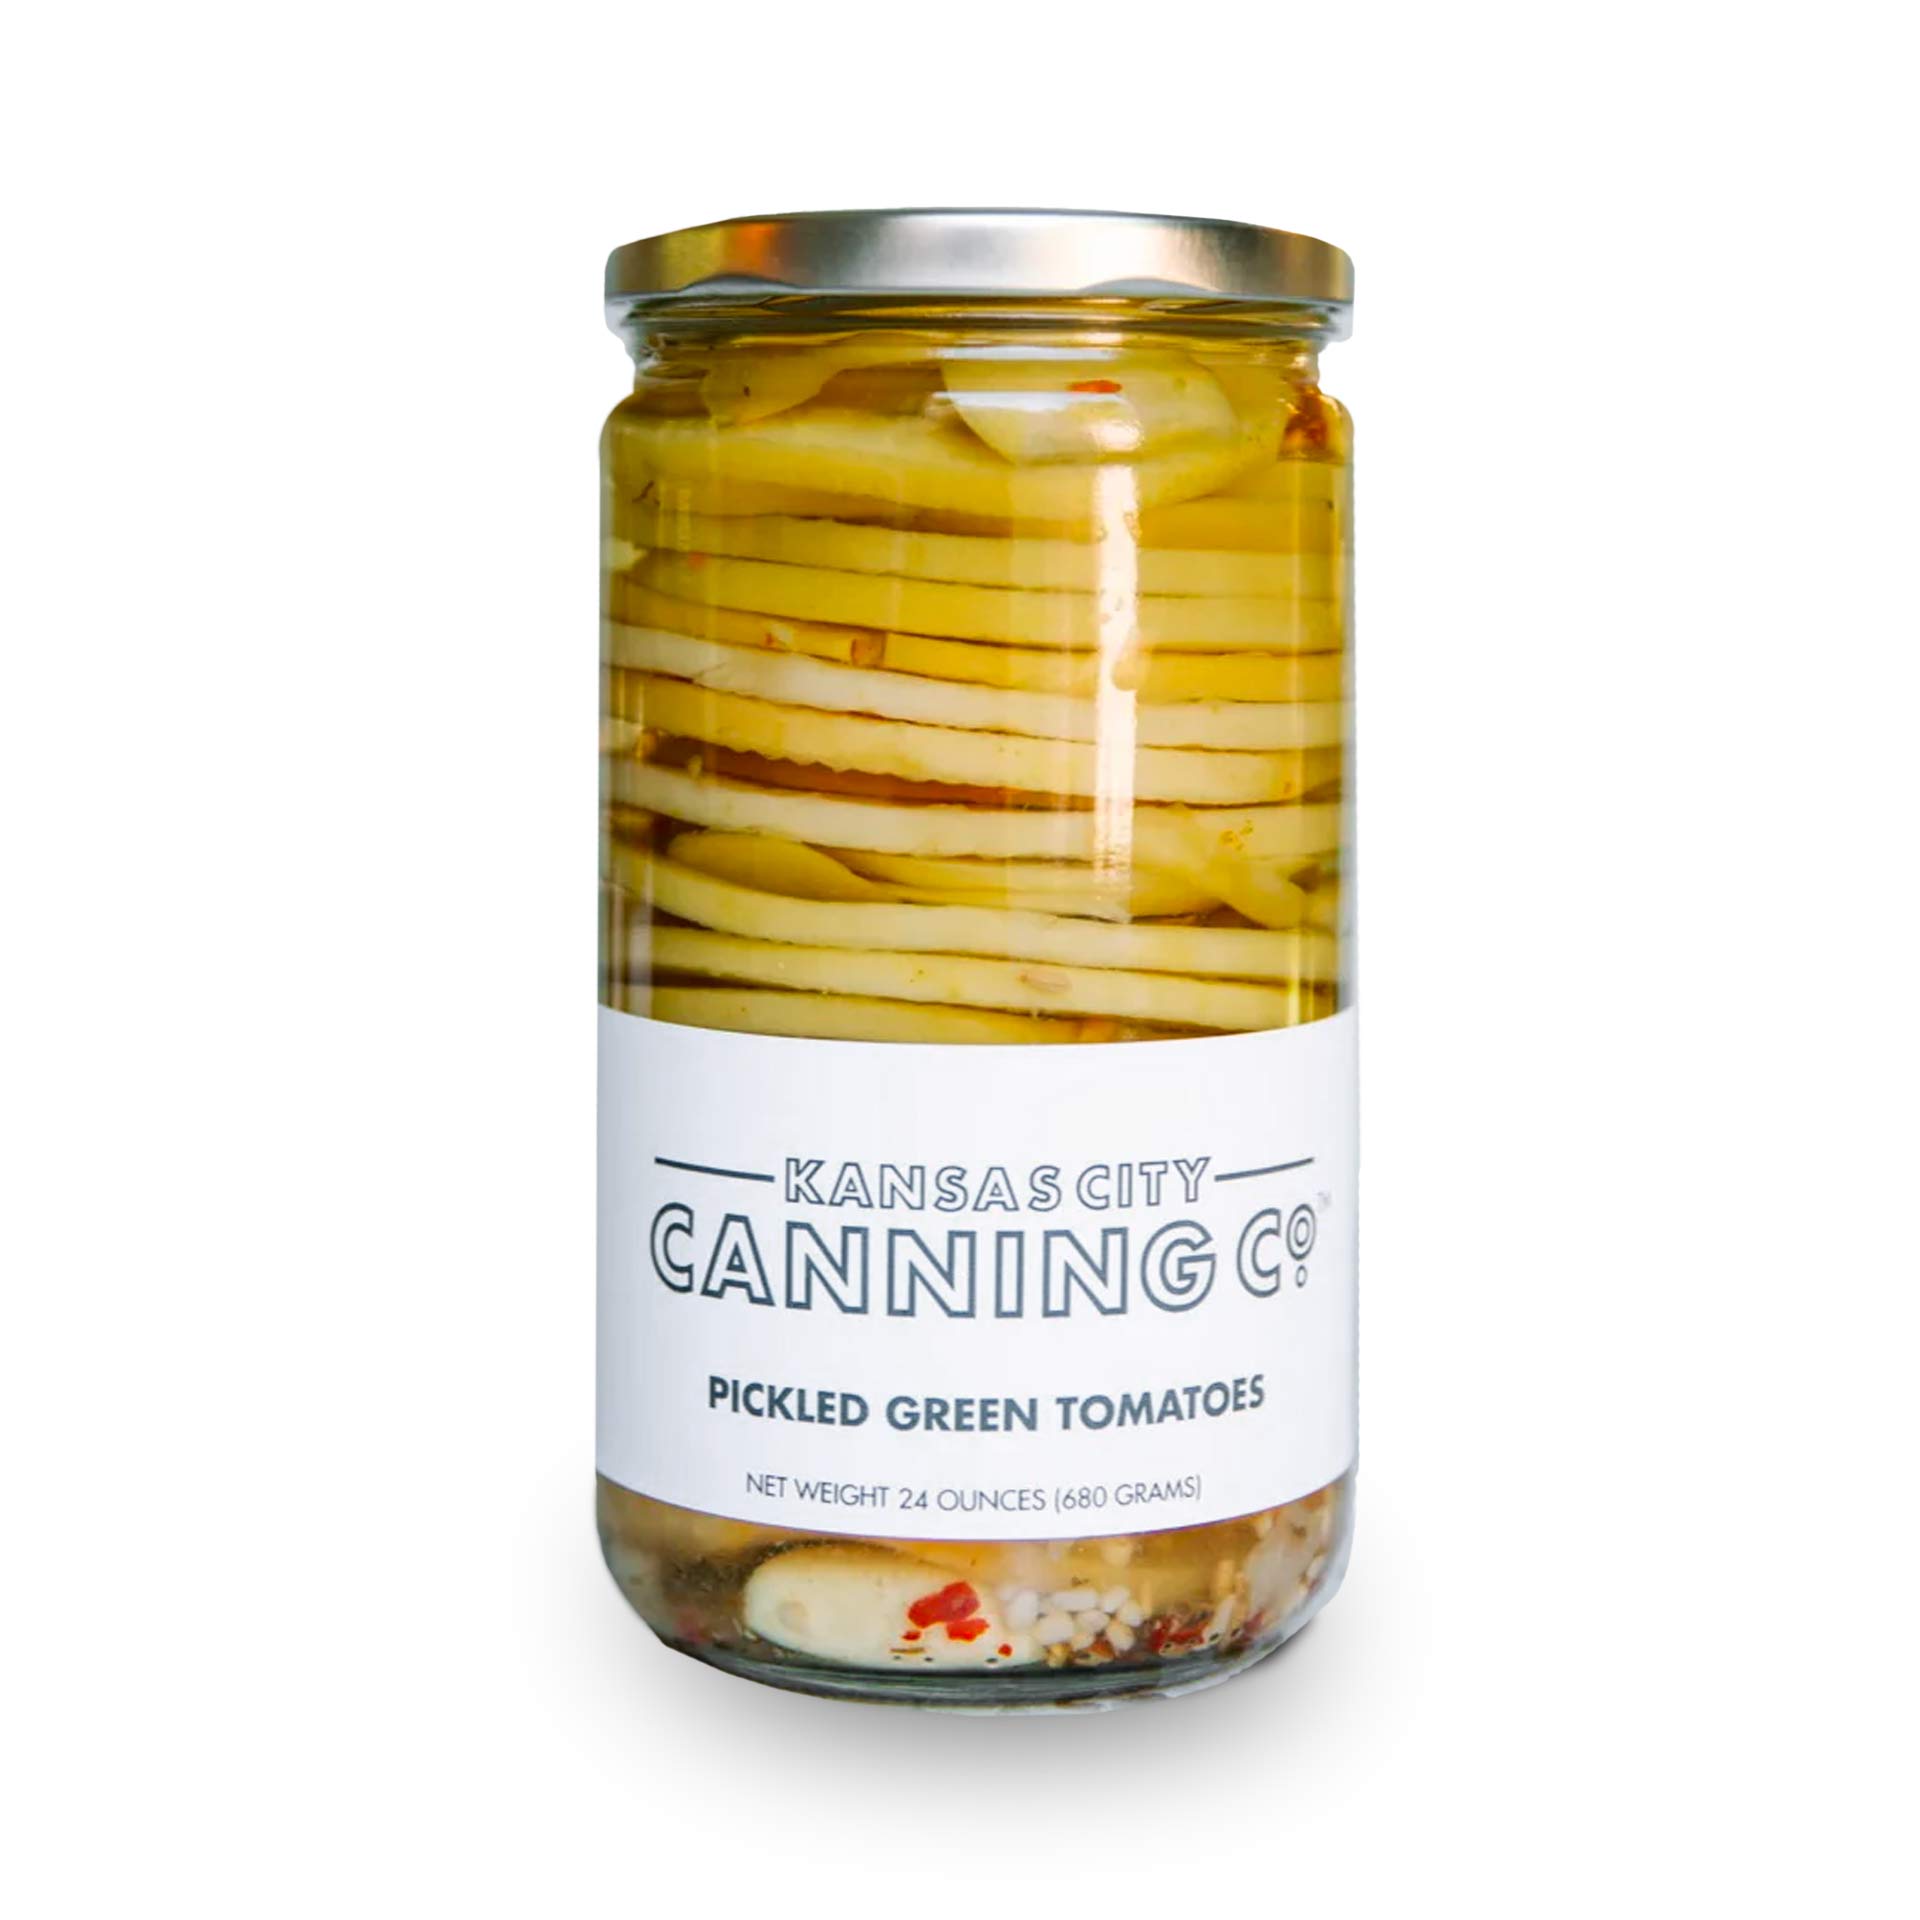 Kansas City Canning Co Pickled Green Tomatoes 12043286